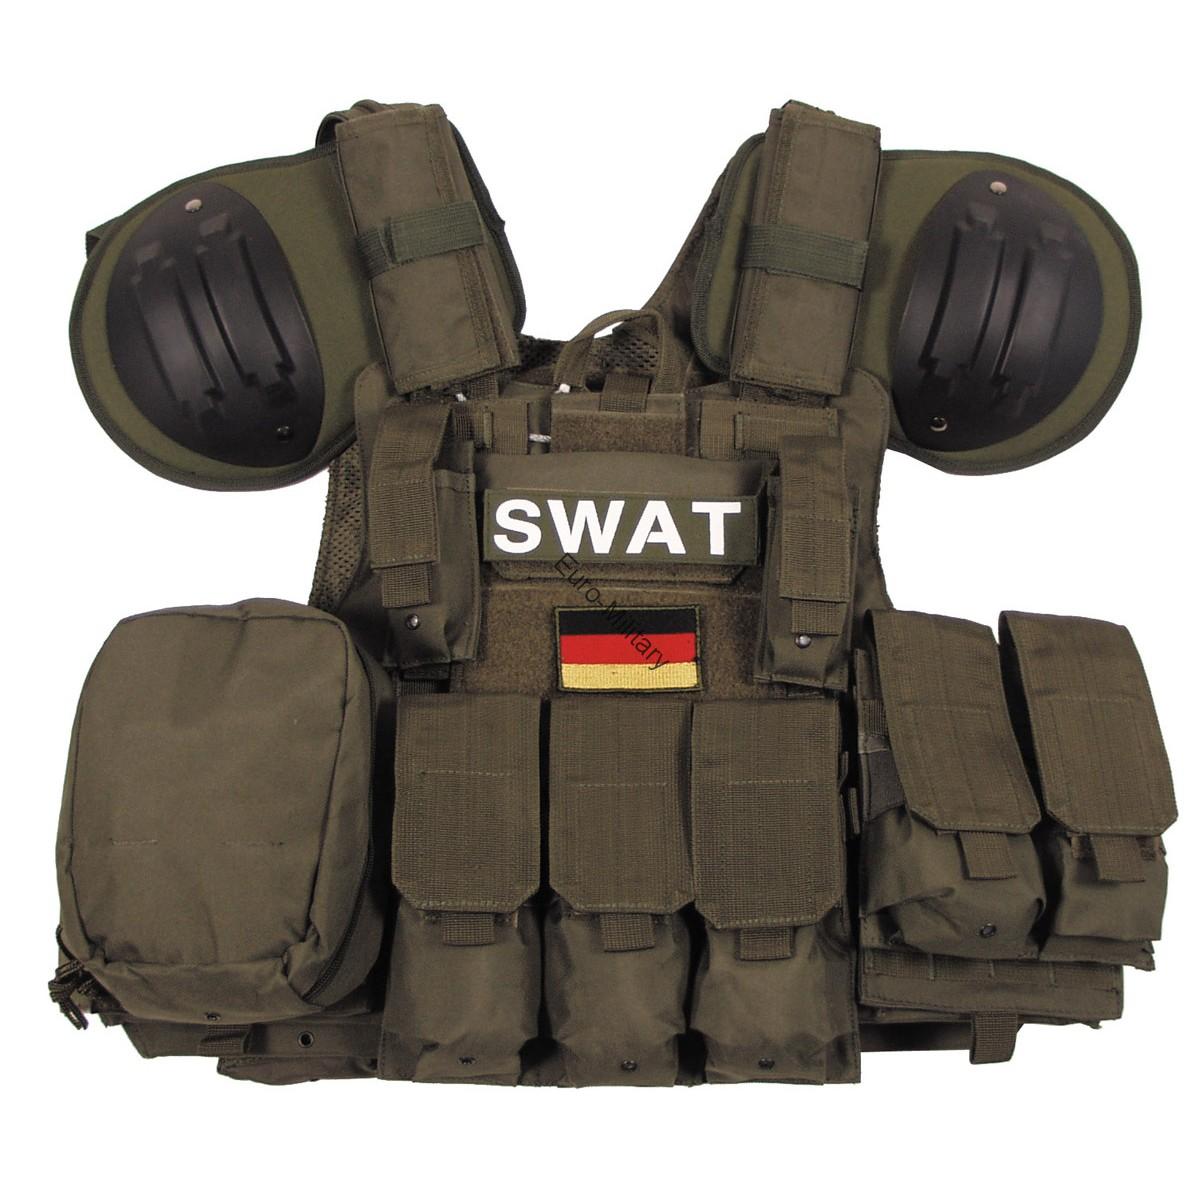 SWAT Tactical Combat MODULAR Vest w/ Bags&Pouches Quick Remove - OD Green